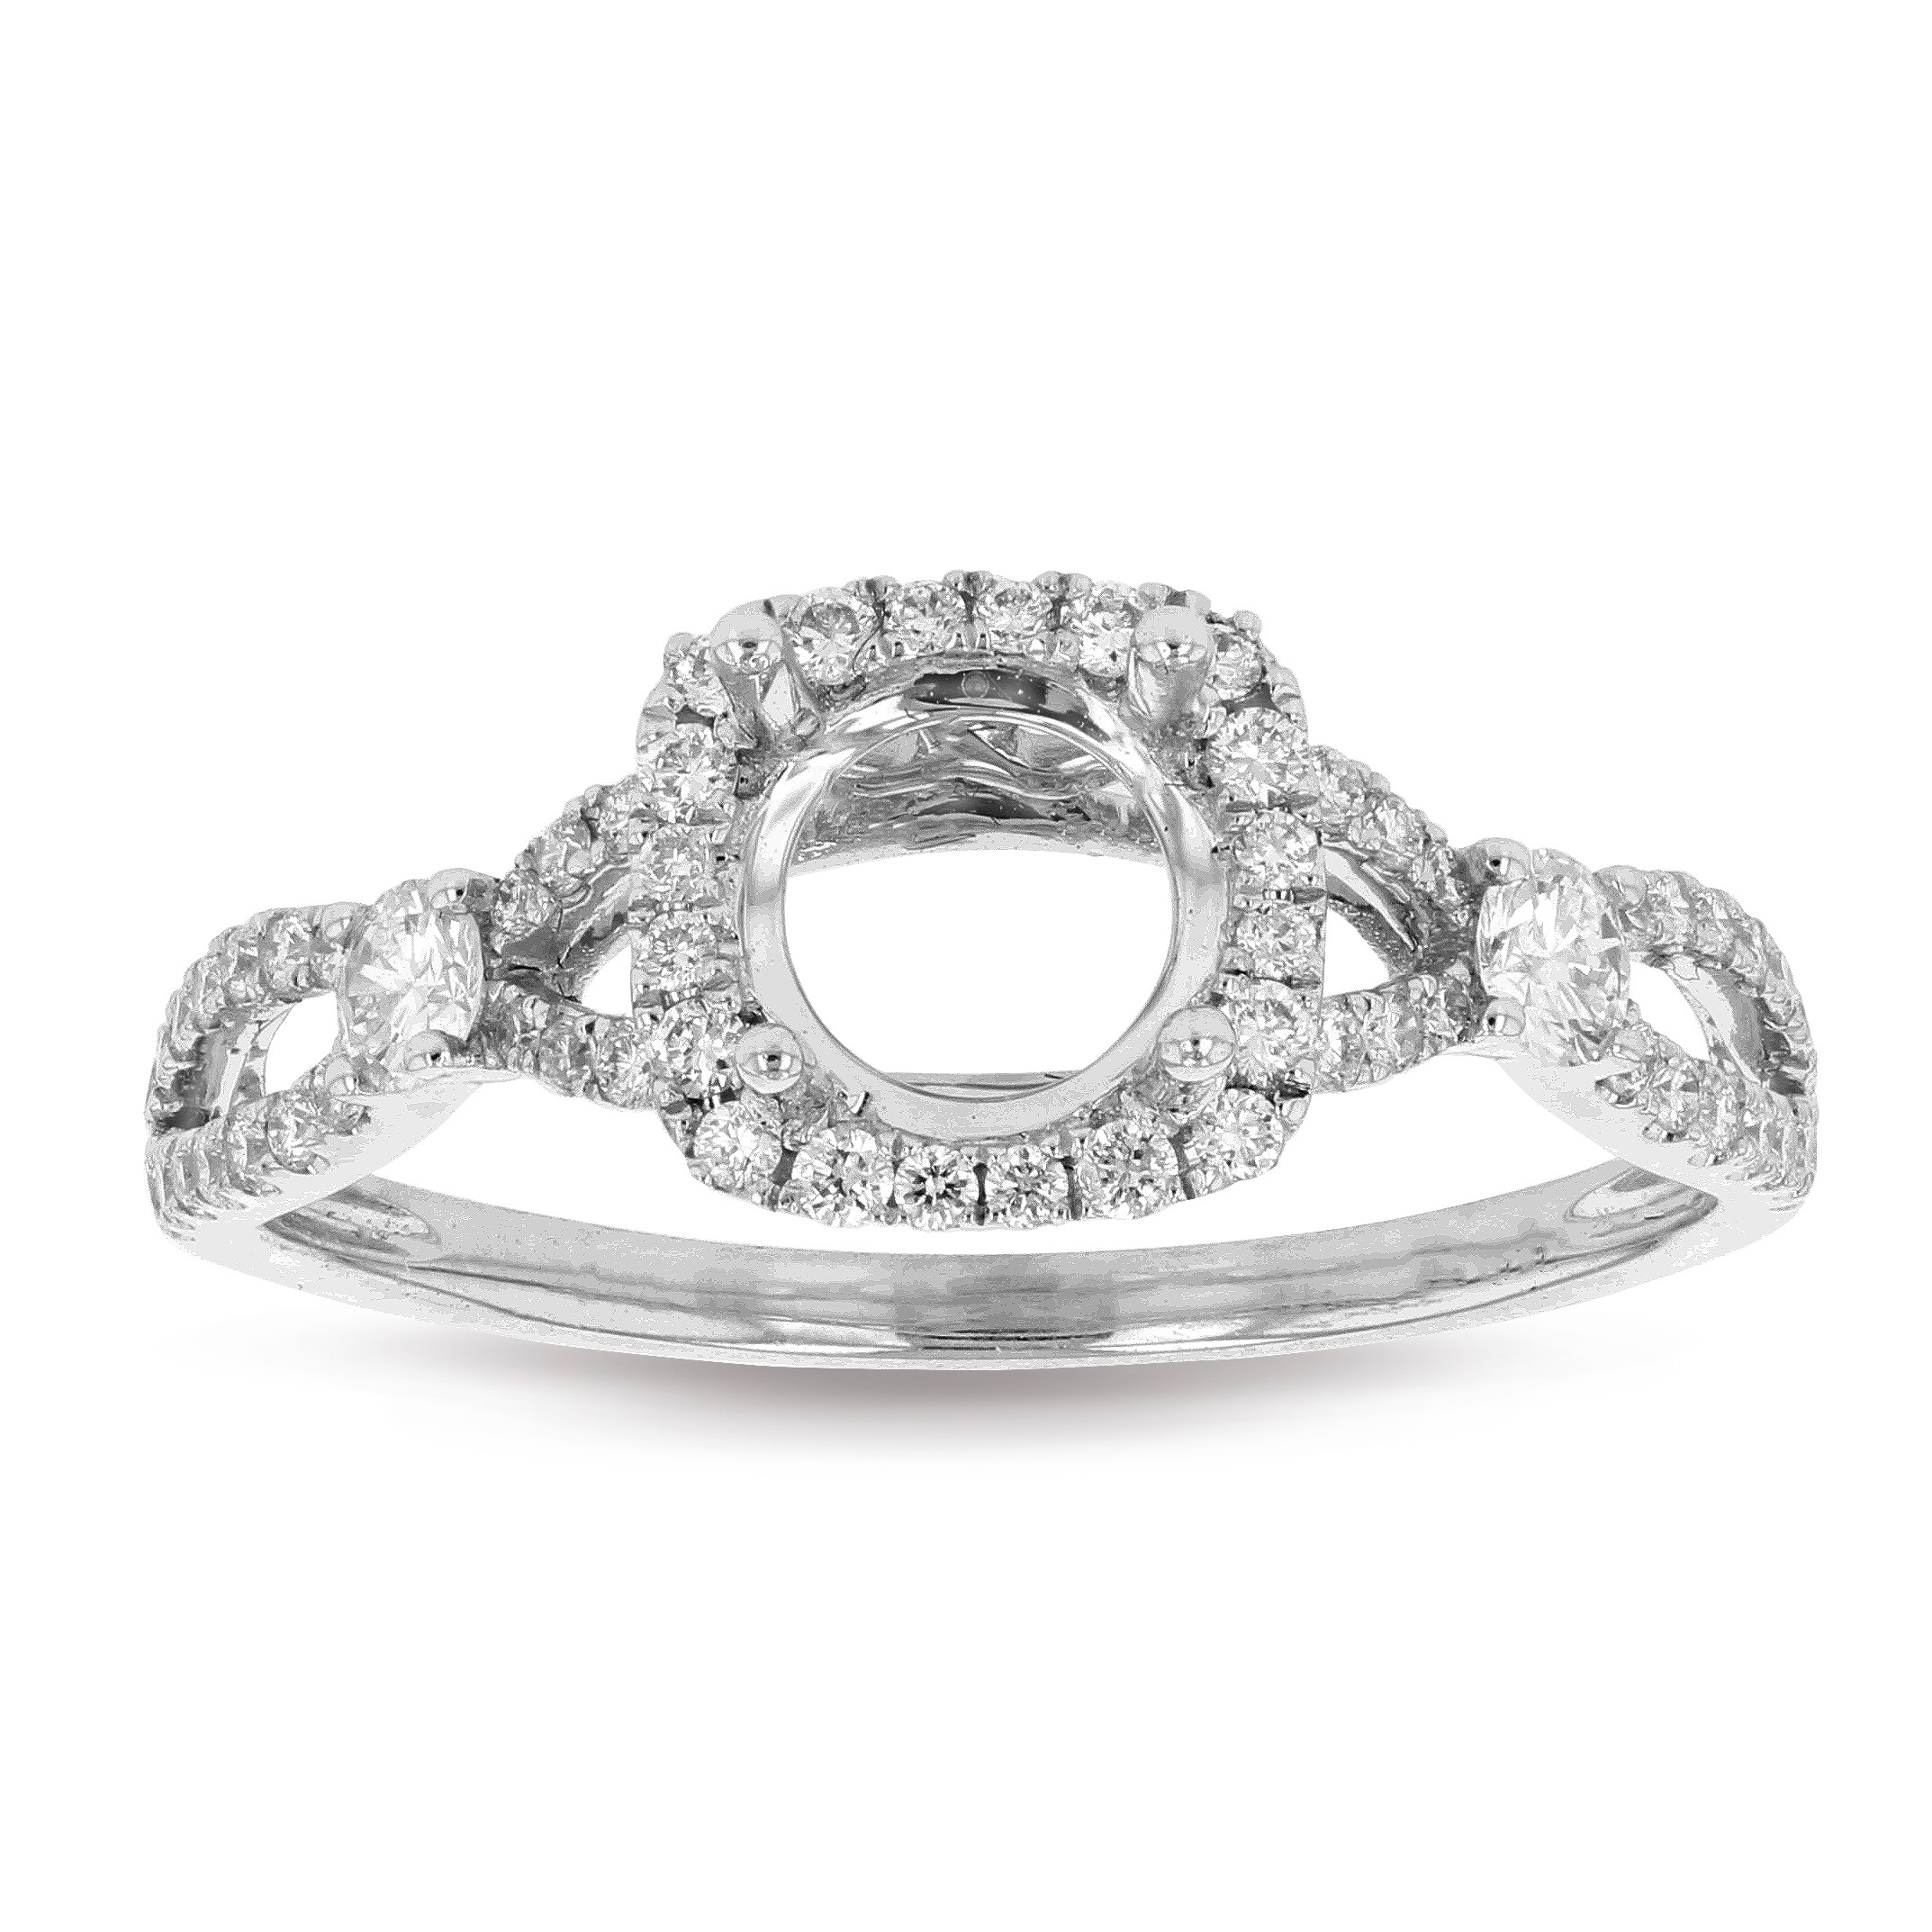 View 0.40ctw Diamond Semi Mount Engagement Ring in 18k White Gold